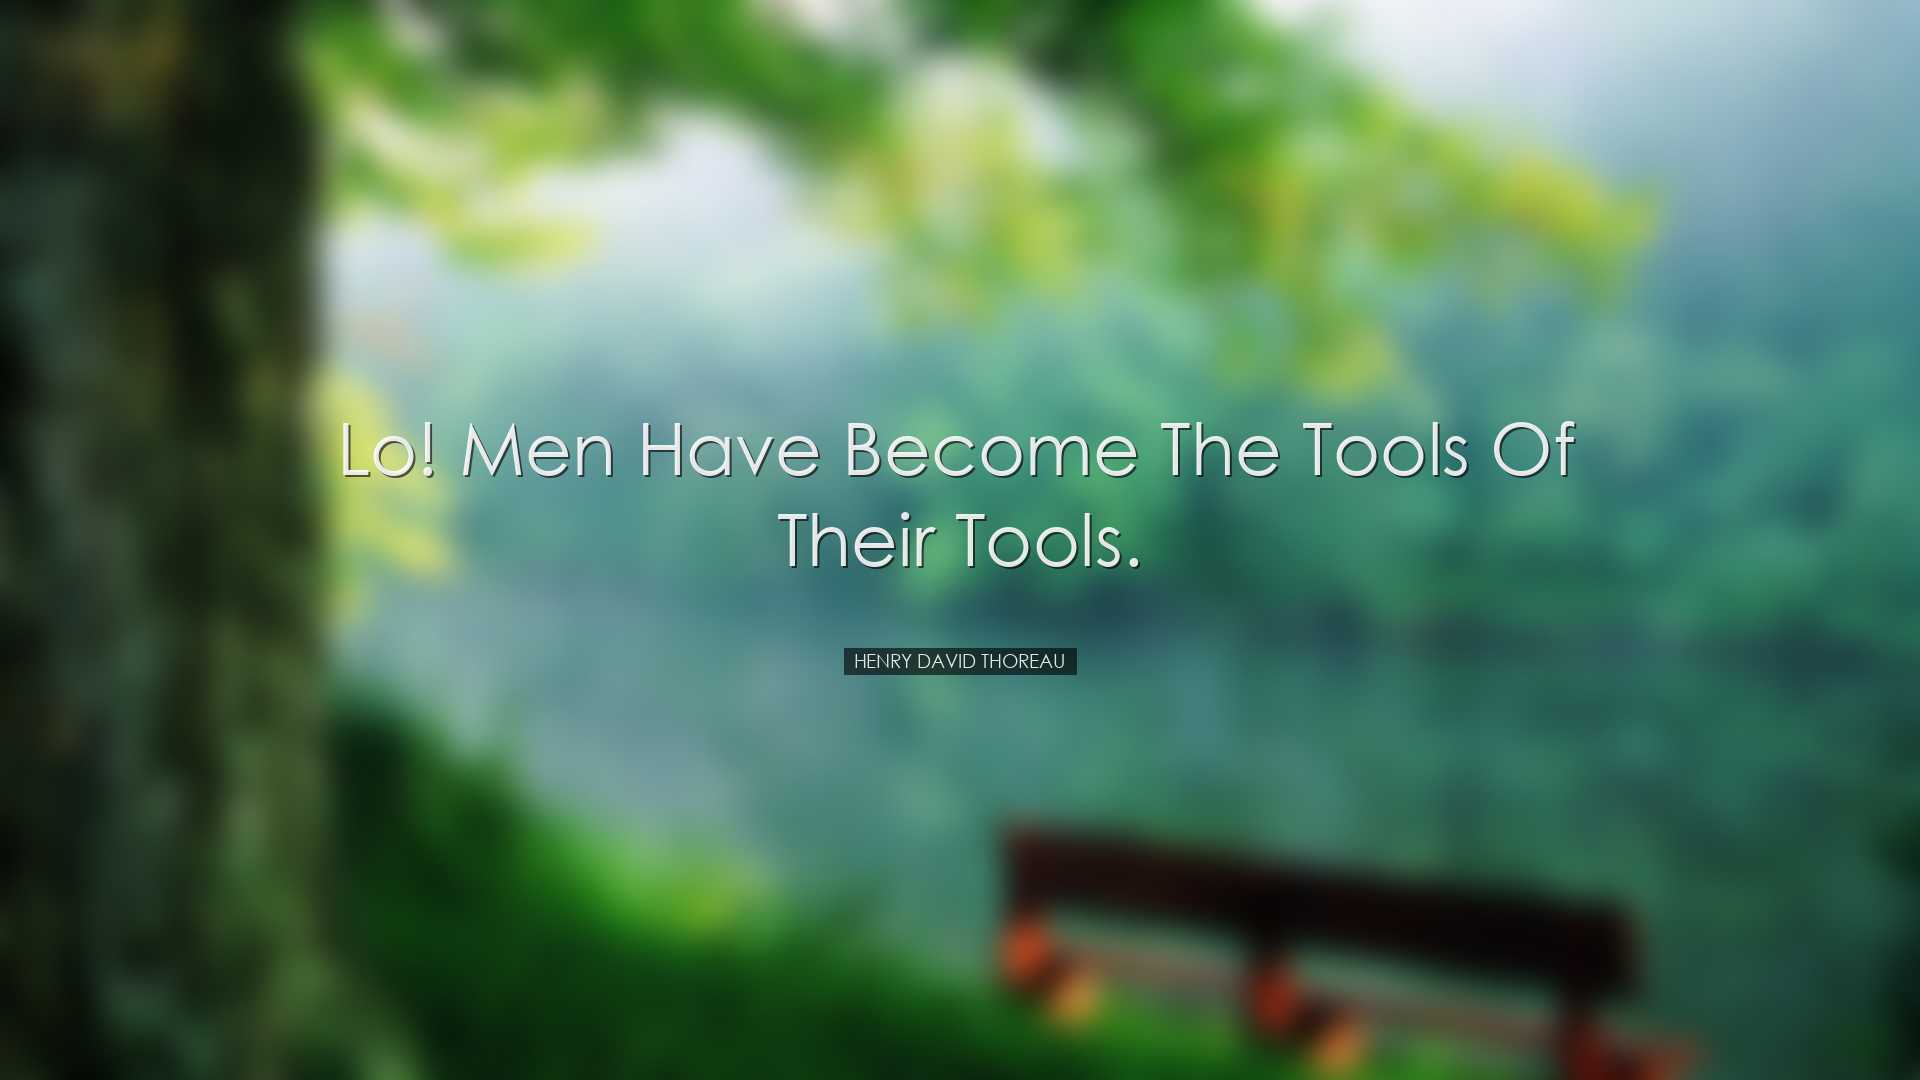 Lo! Men have become the tools of their tools. - Henry David Thorea